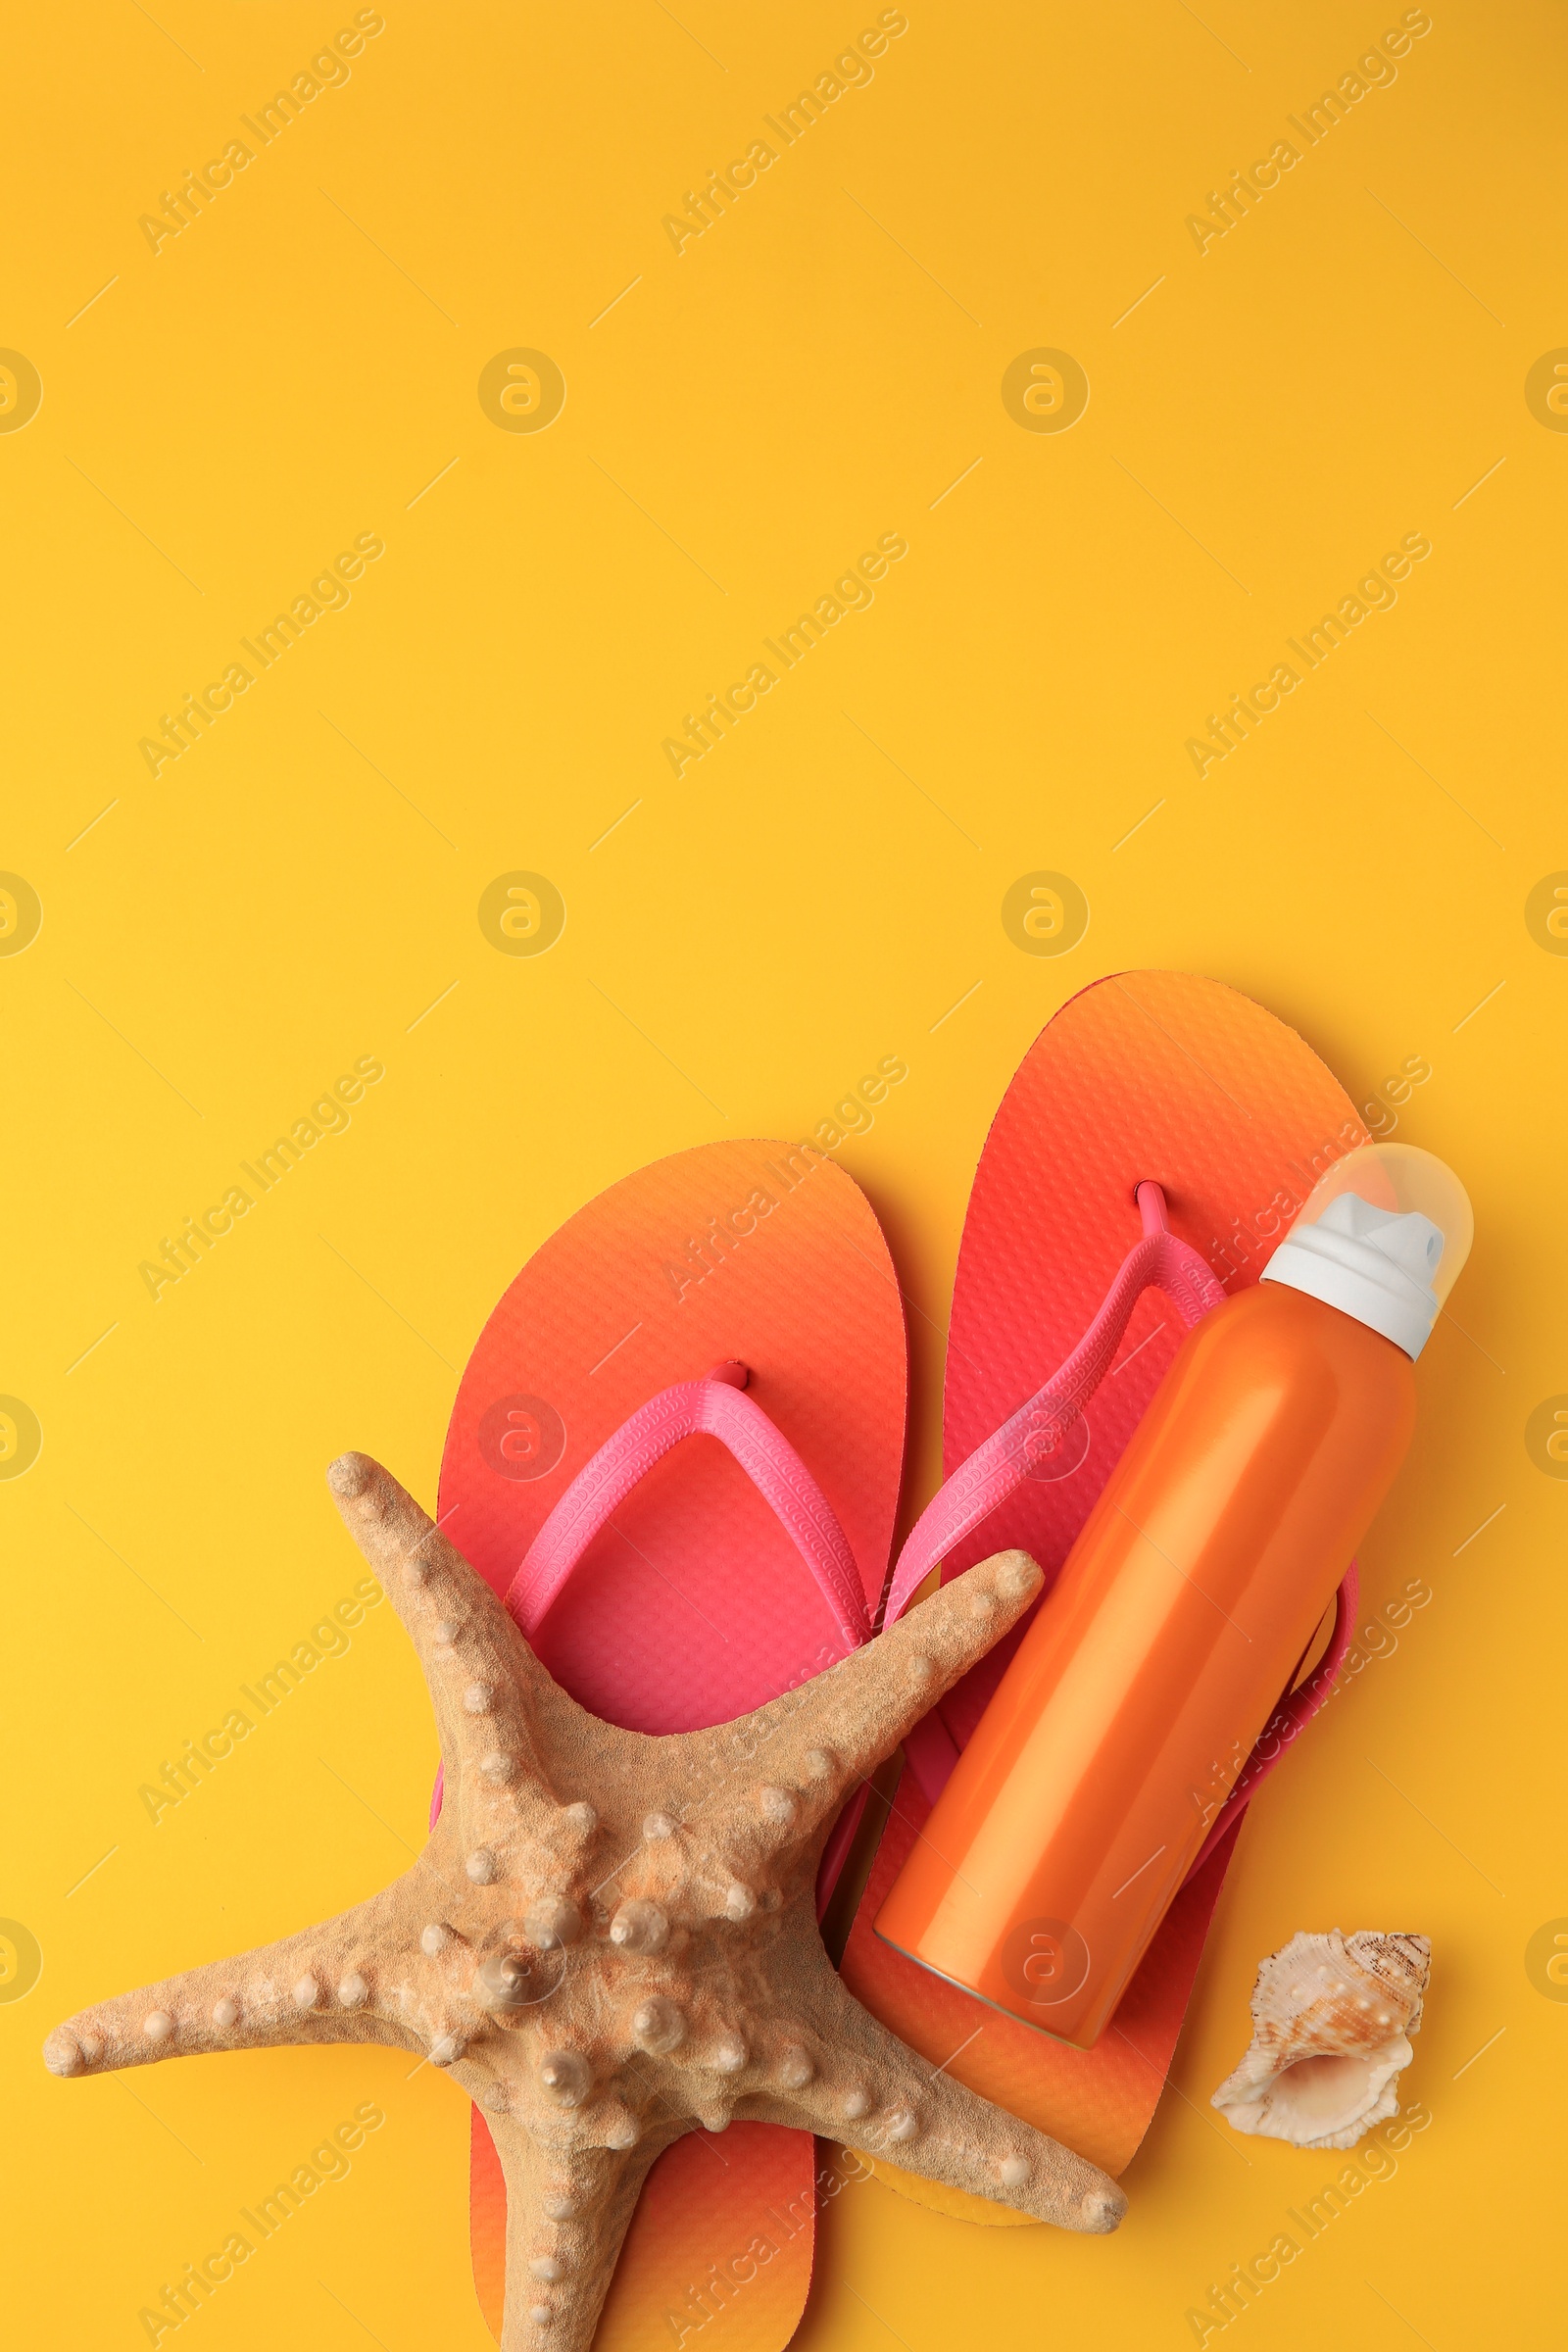 Photo of Sunscreen, starfish, shell and flip flops on orange background, flat lay with space for text. Sun protection